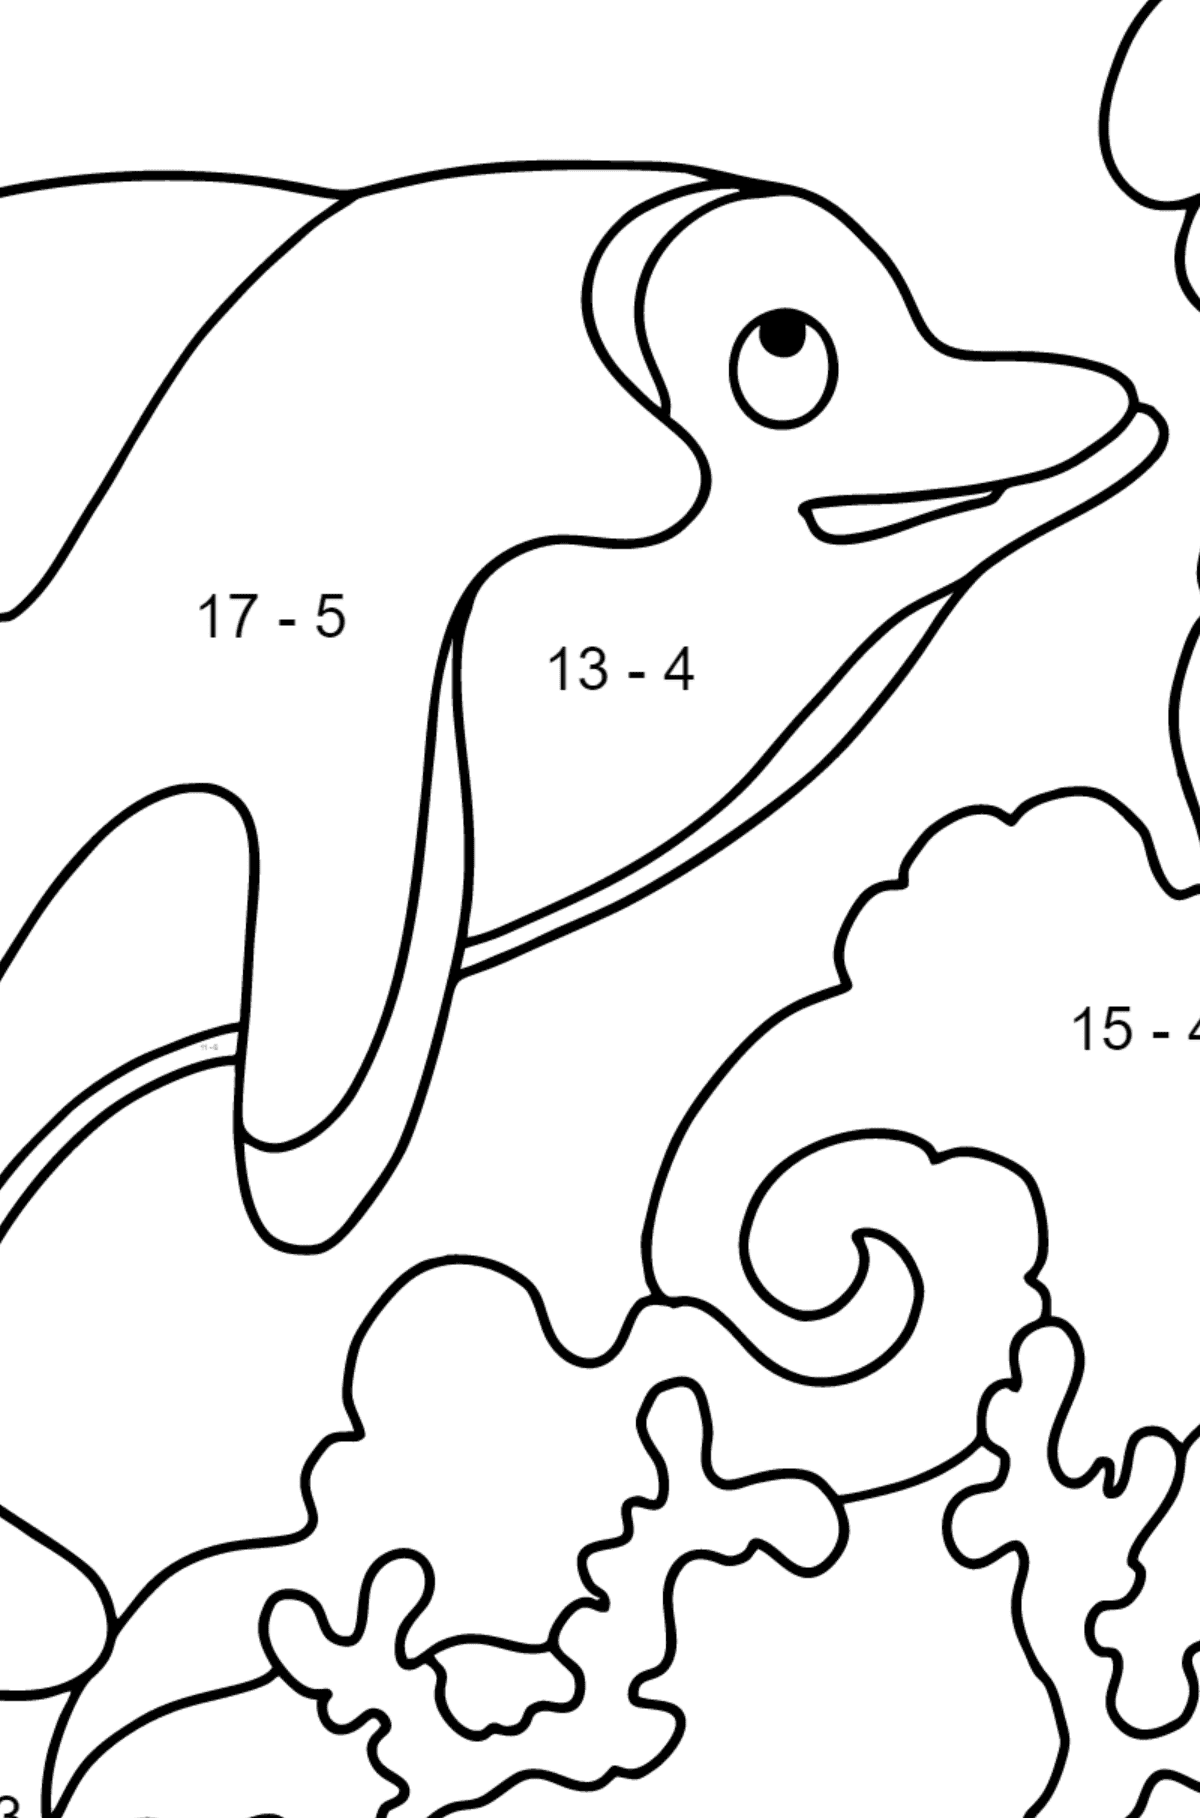 Coloring Page - A Dolphin, a Smart and Friendly Animal - Math Coloring - Subtraction for Children